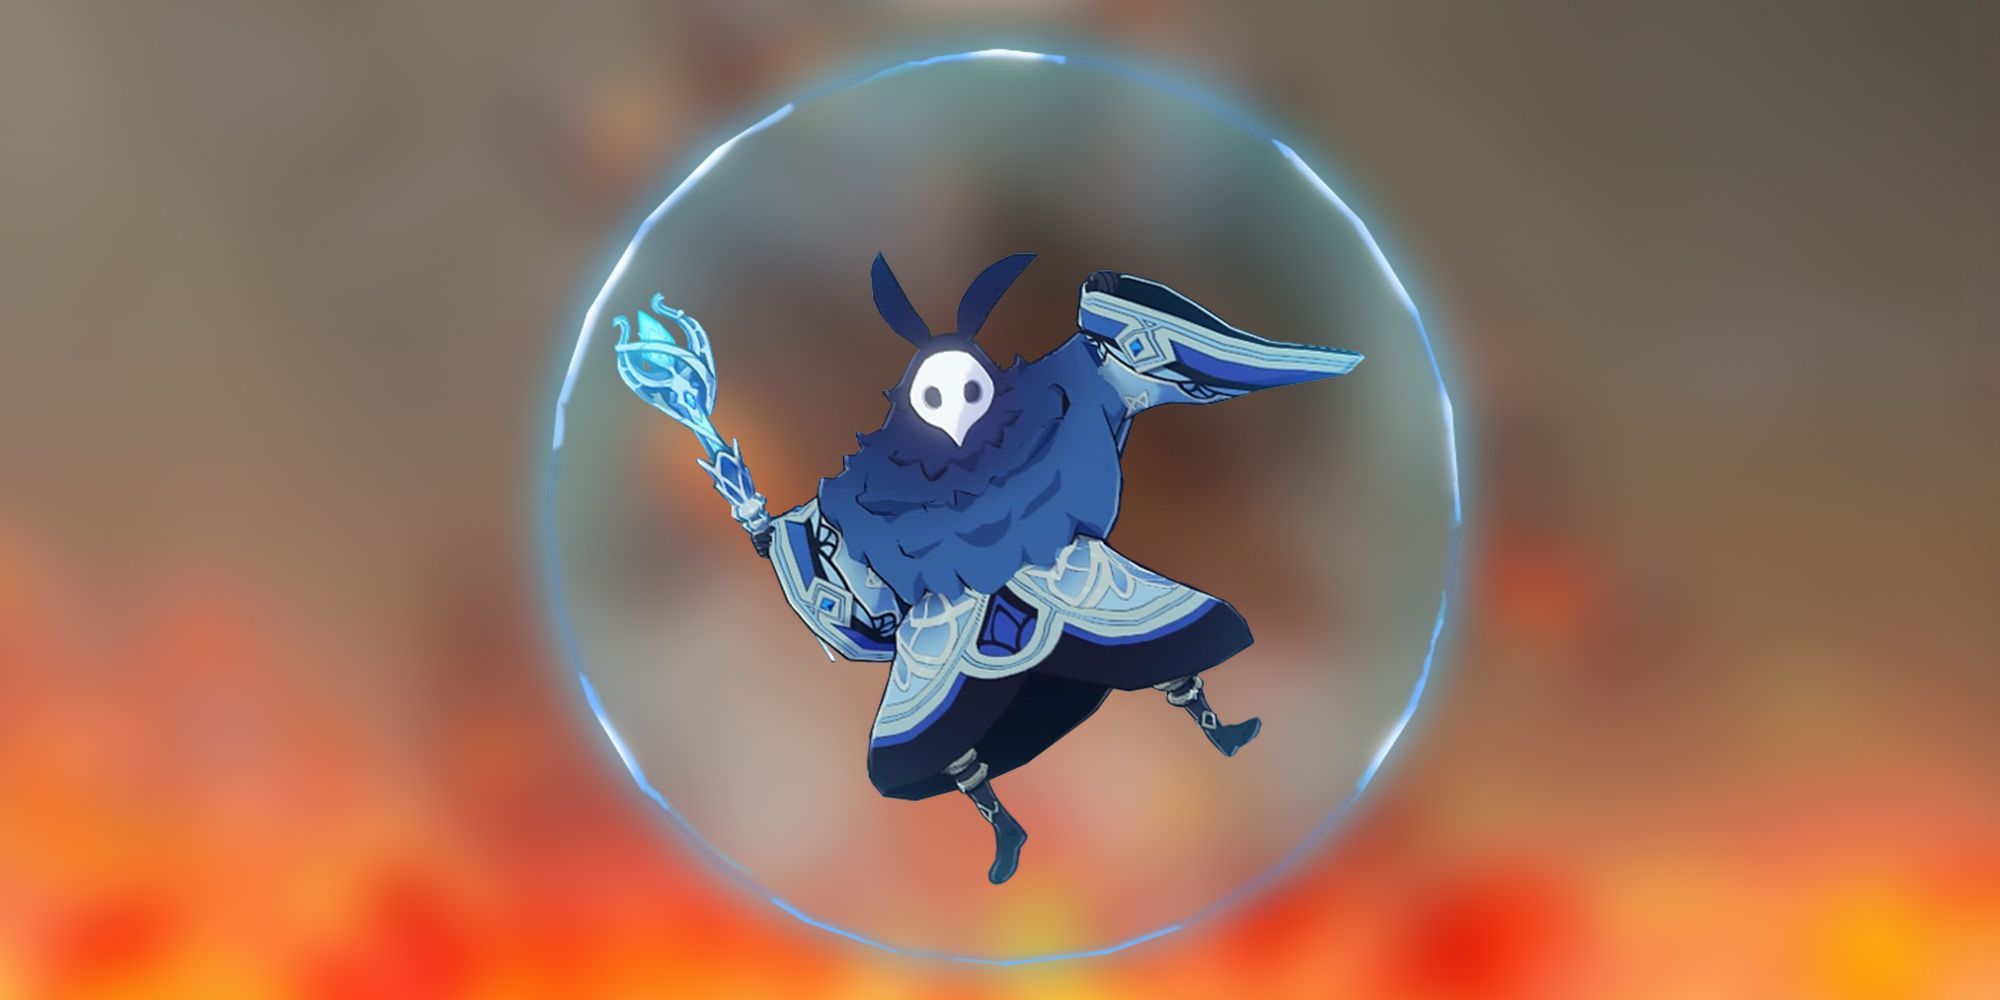 A Hydro Abyss Mage with its shield up in Genshin Impact.